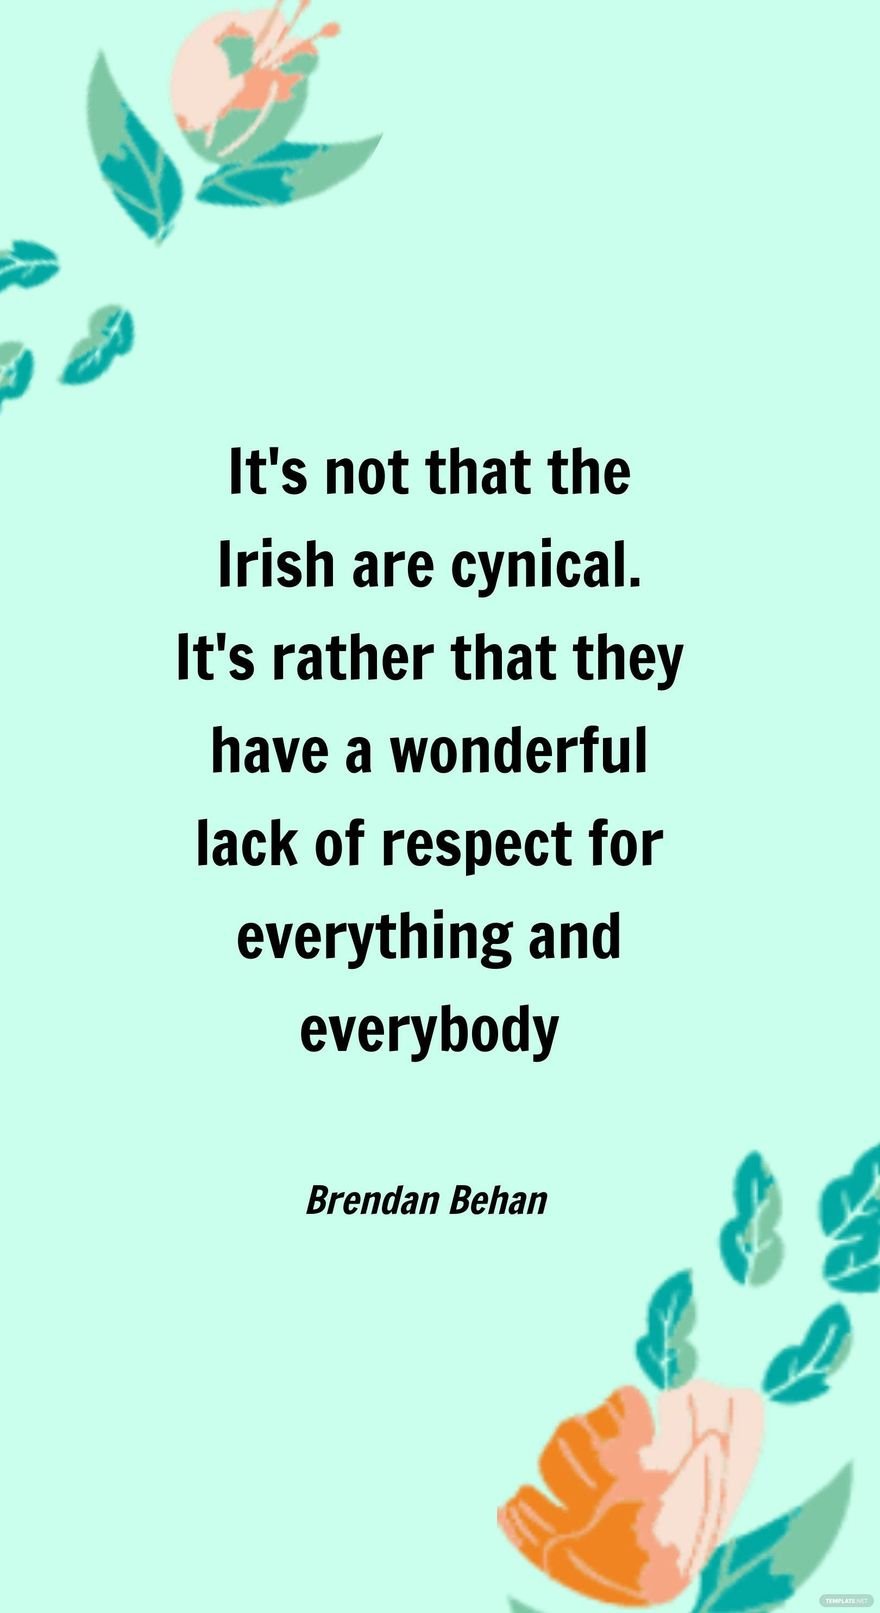 Free Brendan Behan- It's not that the Irish are cynical. It's rather that they have a wonderful lack of respect for everything and everybody. in JPG